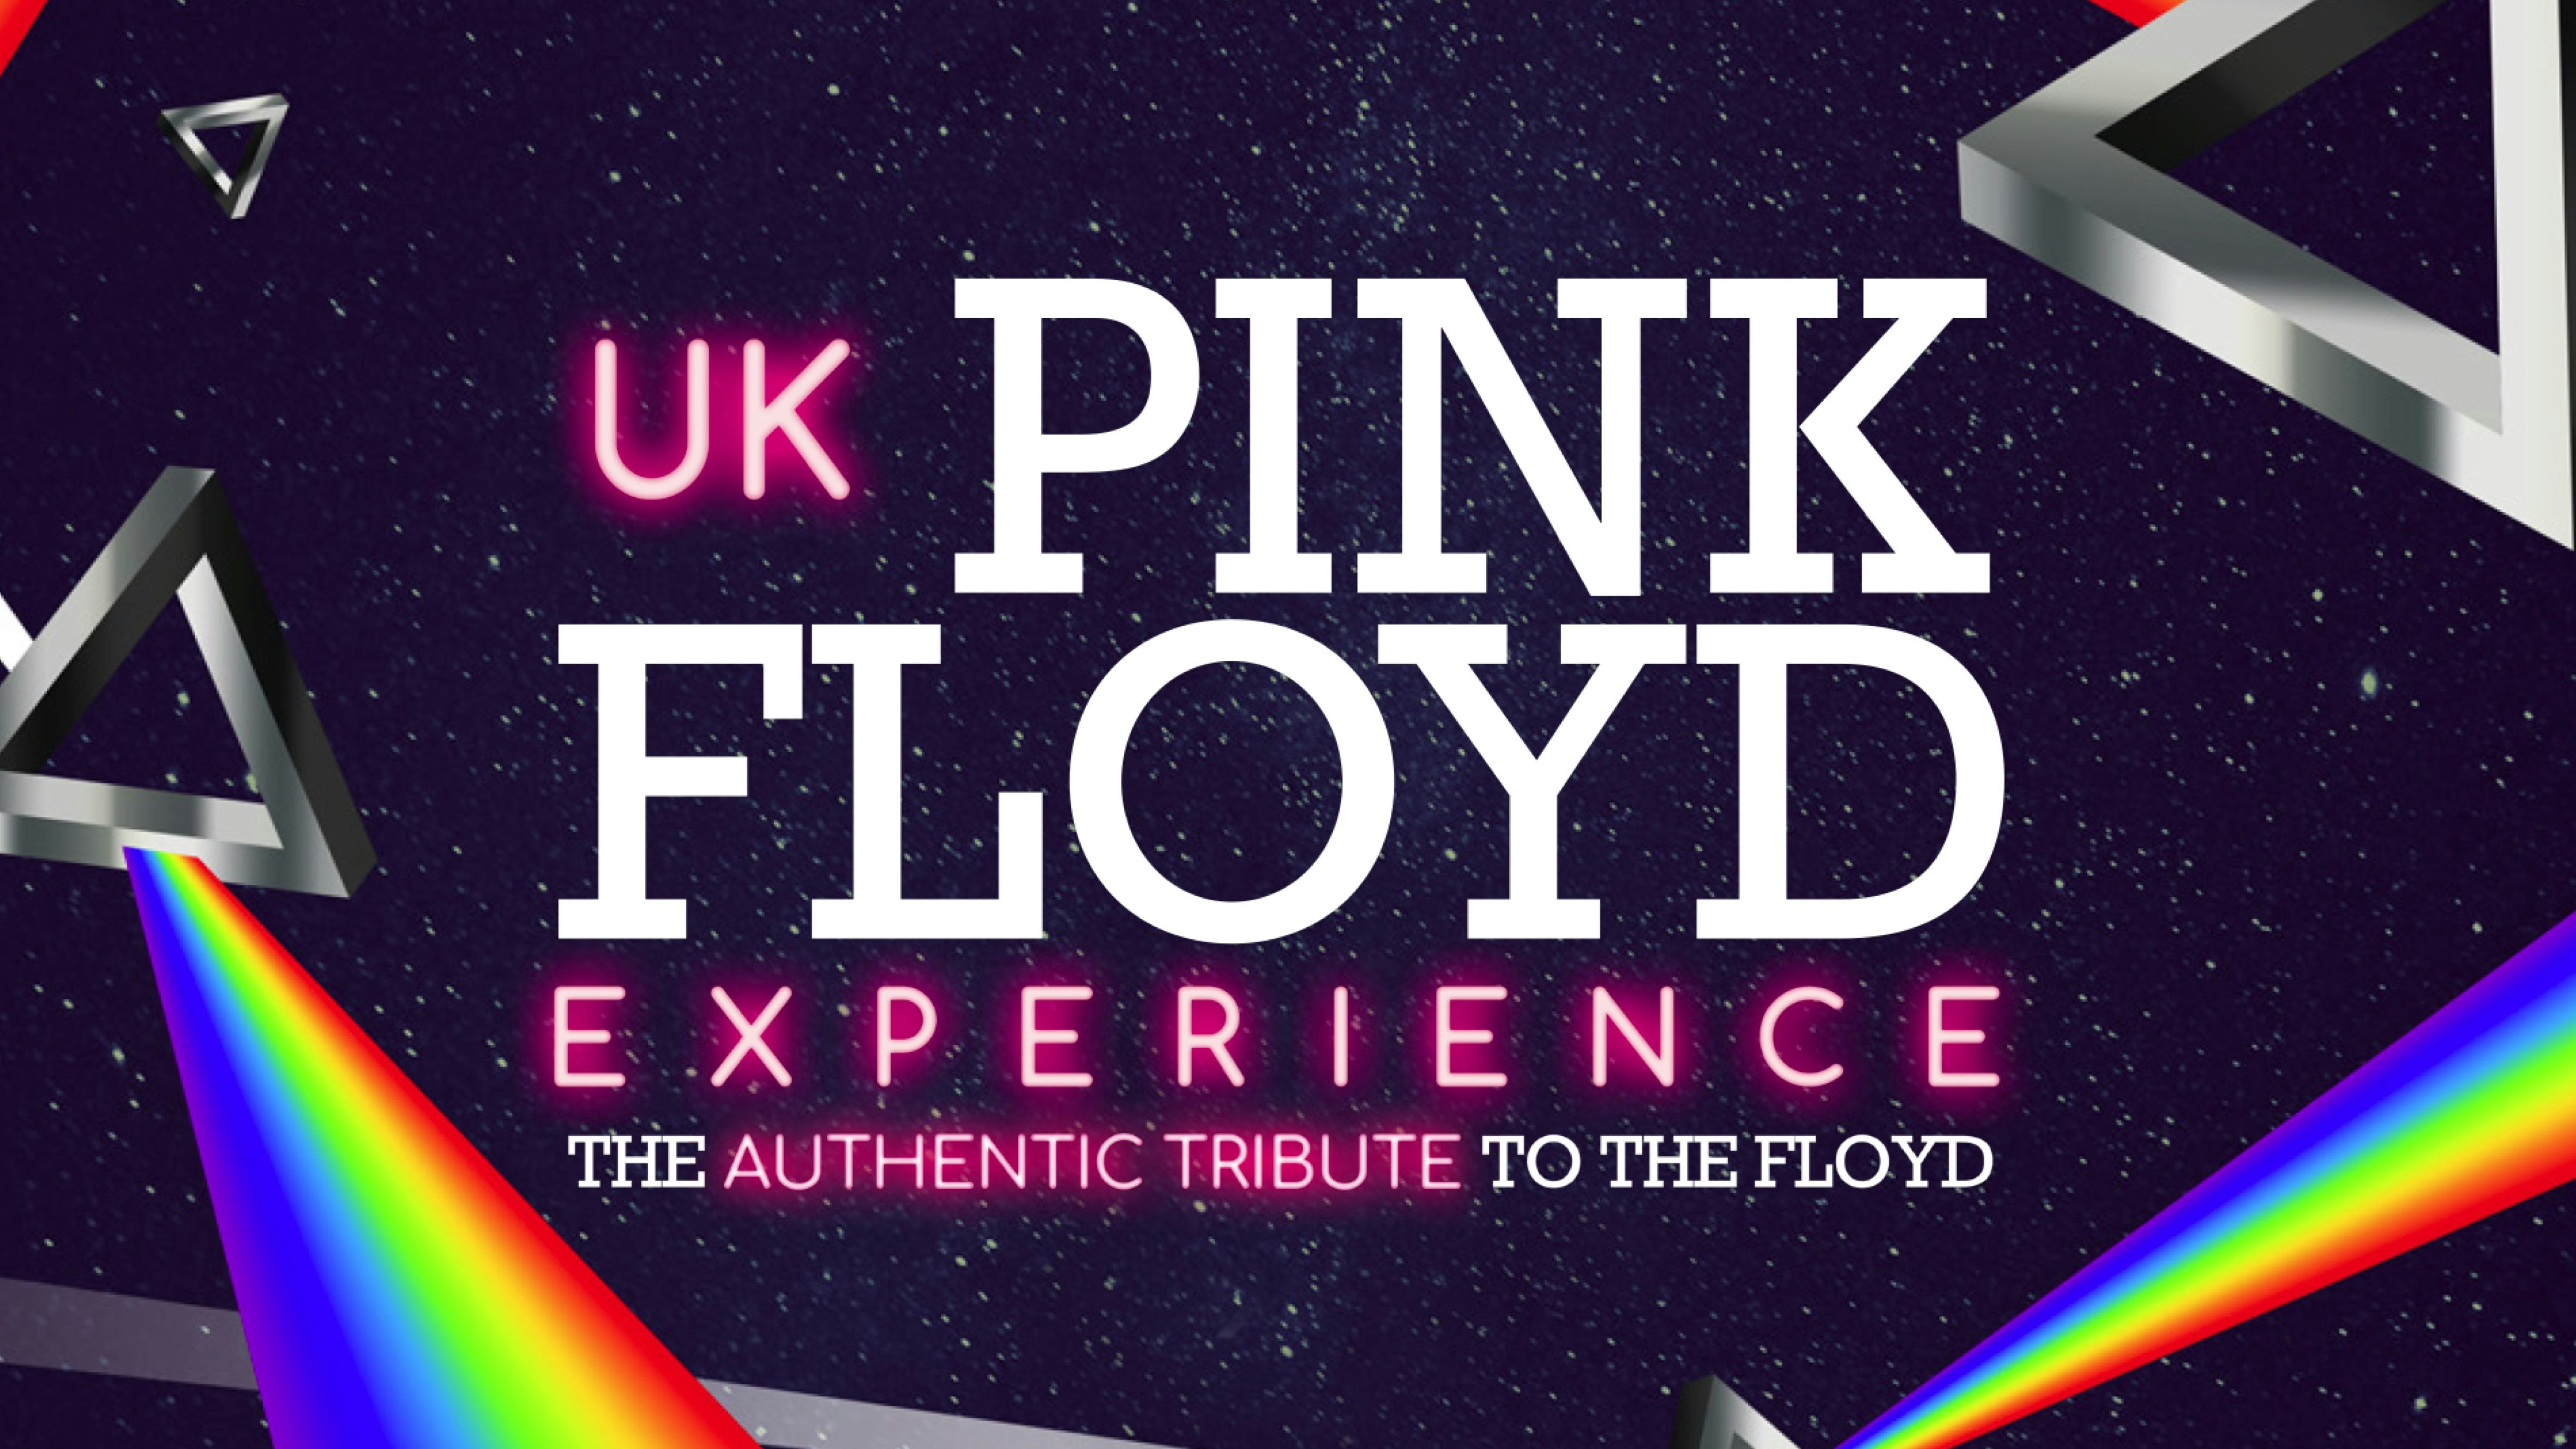 UK Pink Floyd Experience Live – the authentic tribute to the Floyd